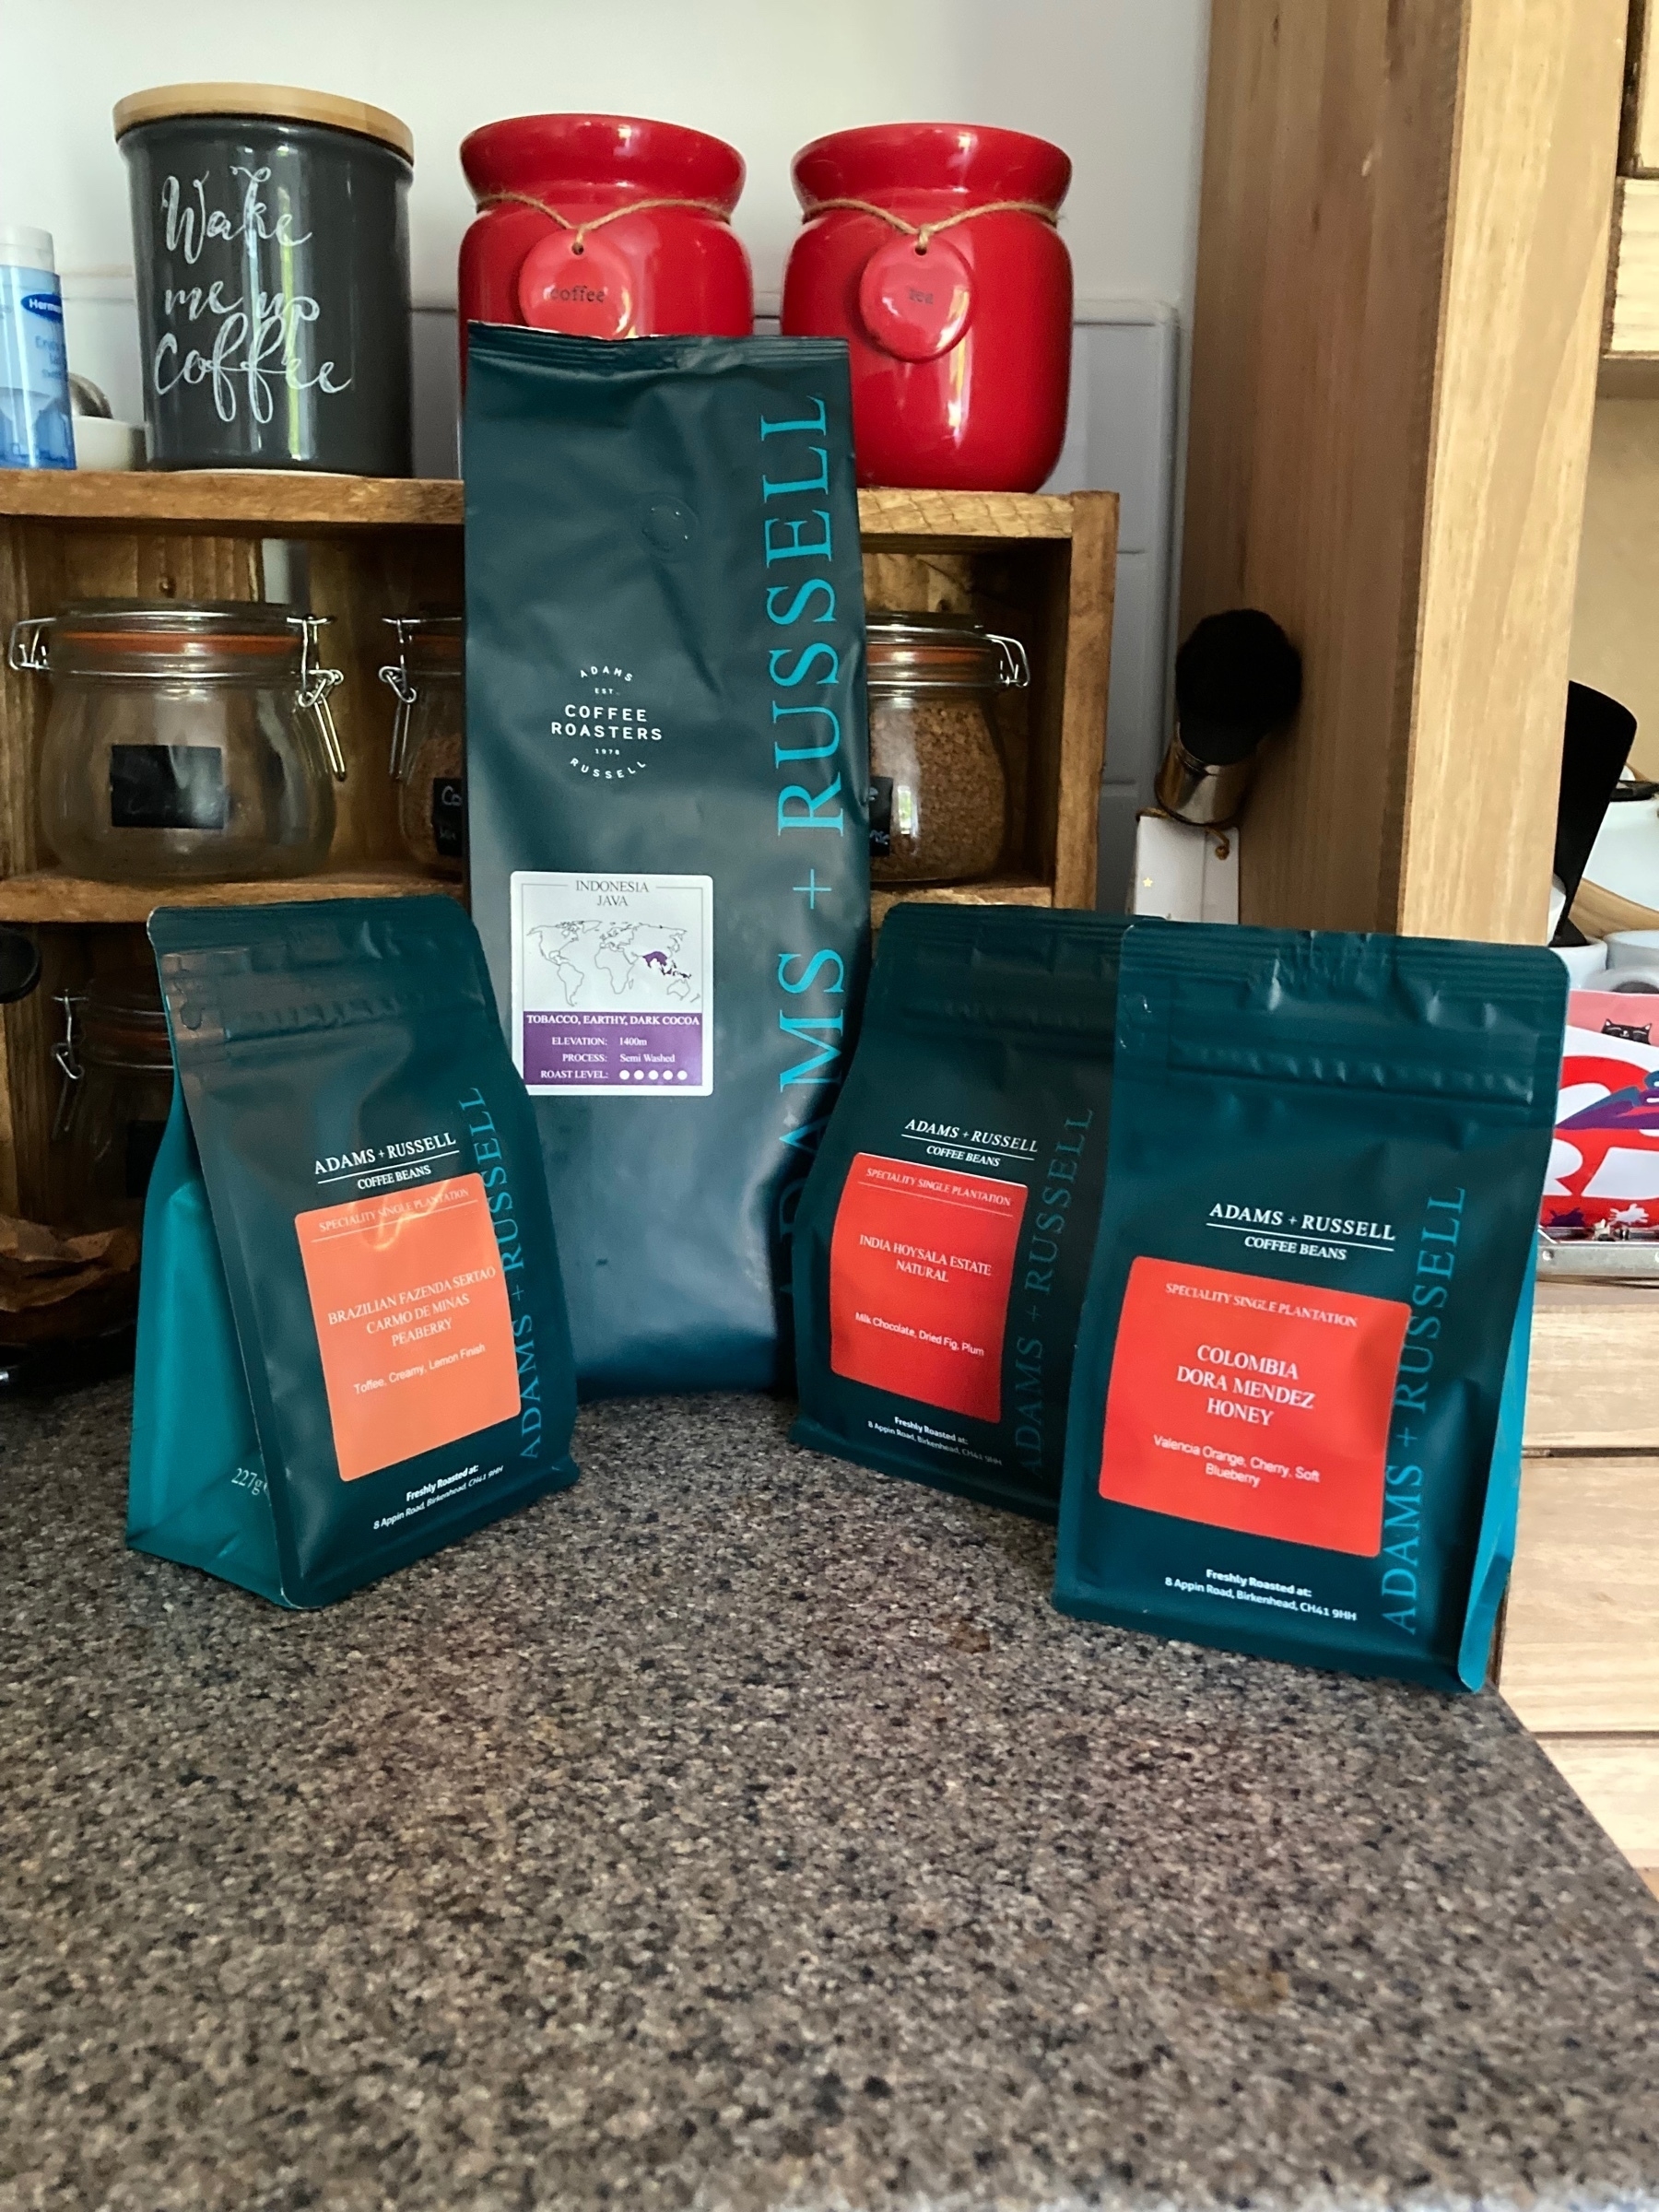 Four new bags of coffee, on top of a kitchen counter.